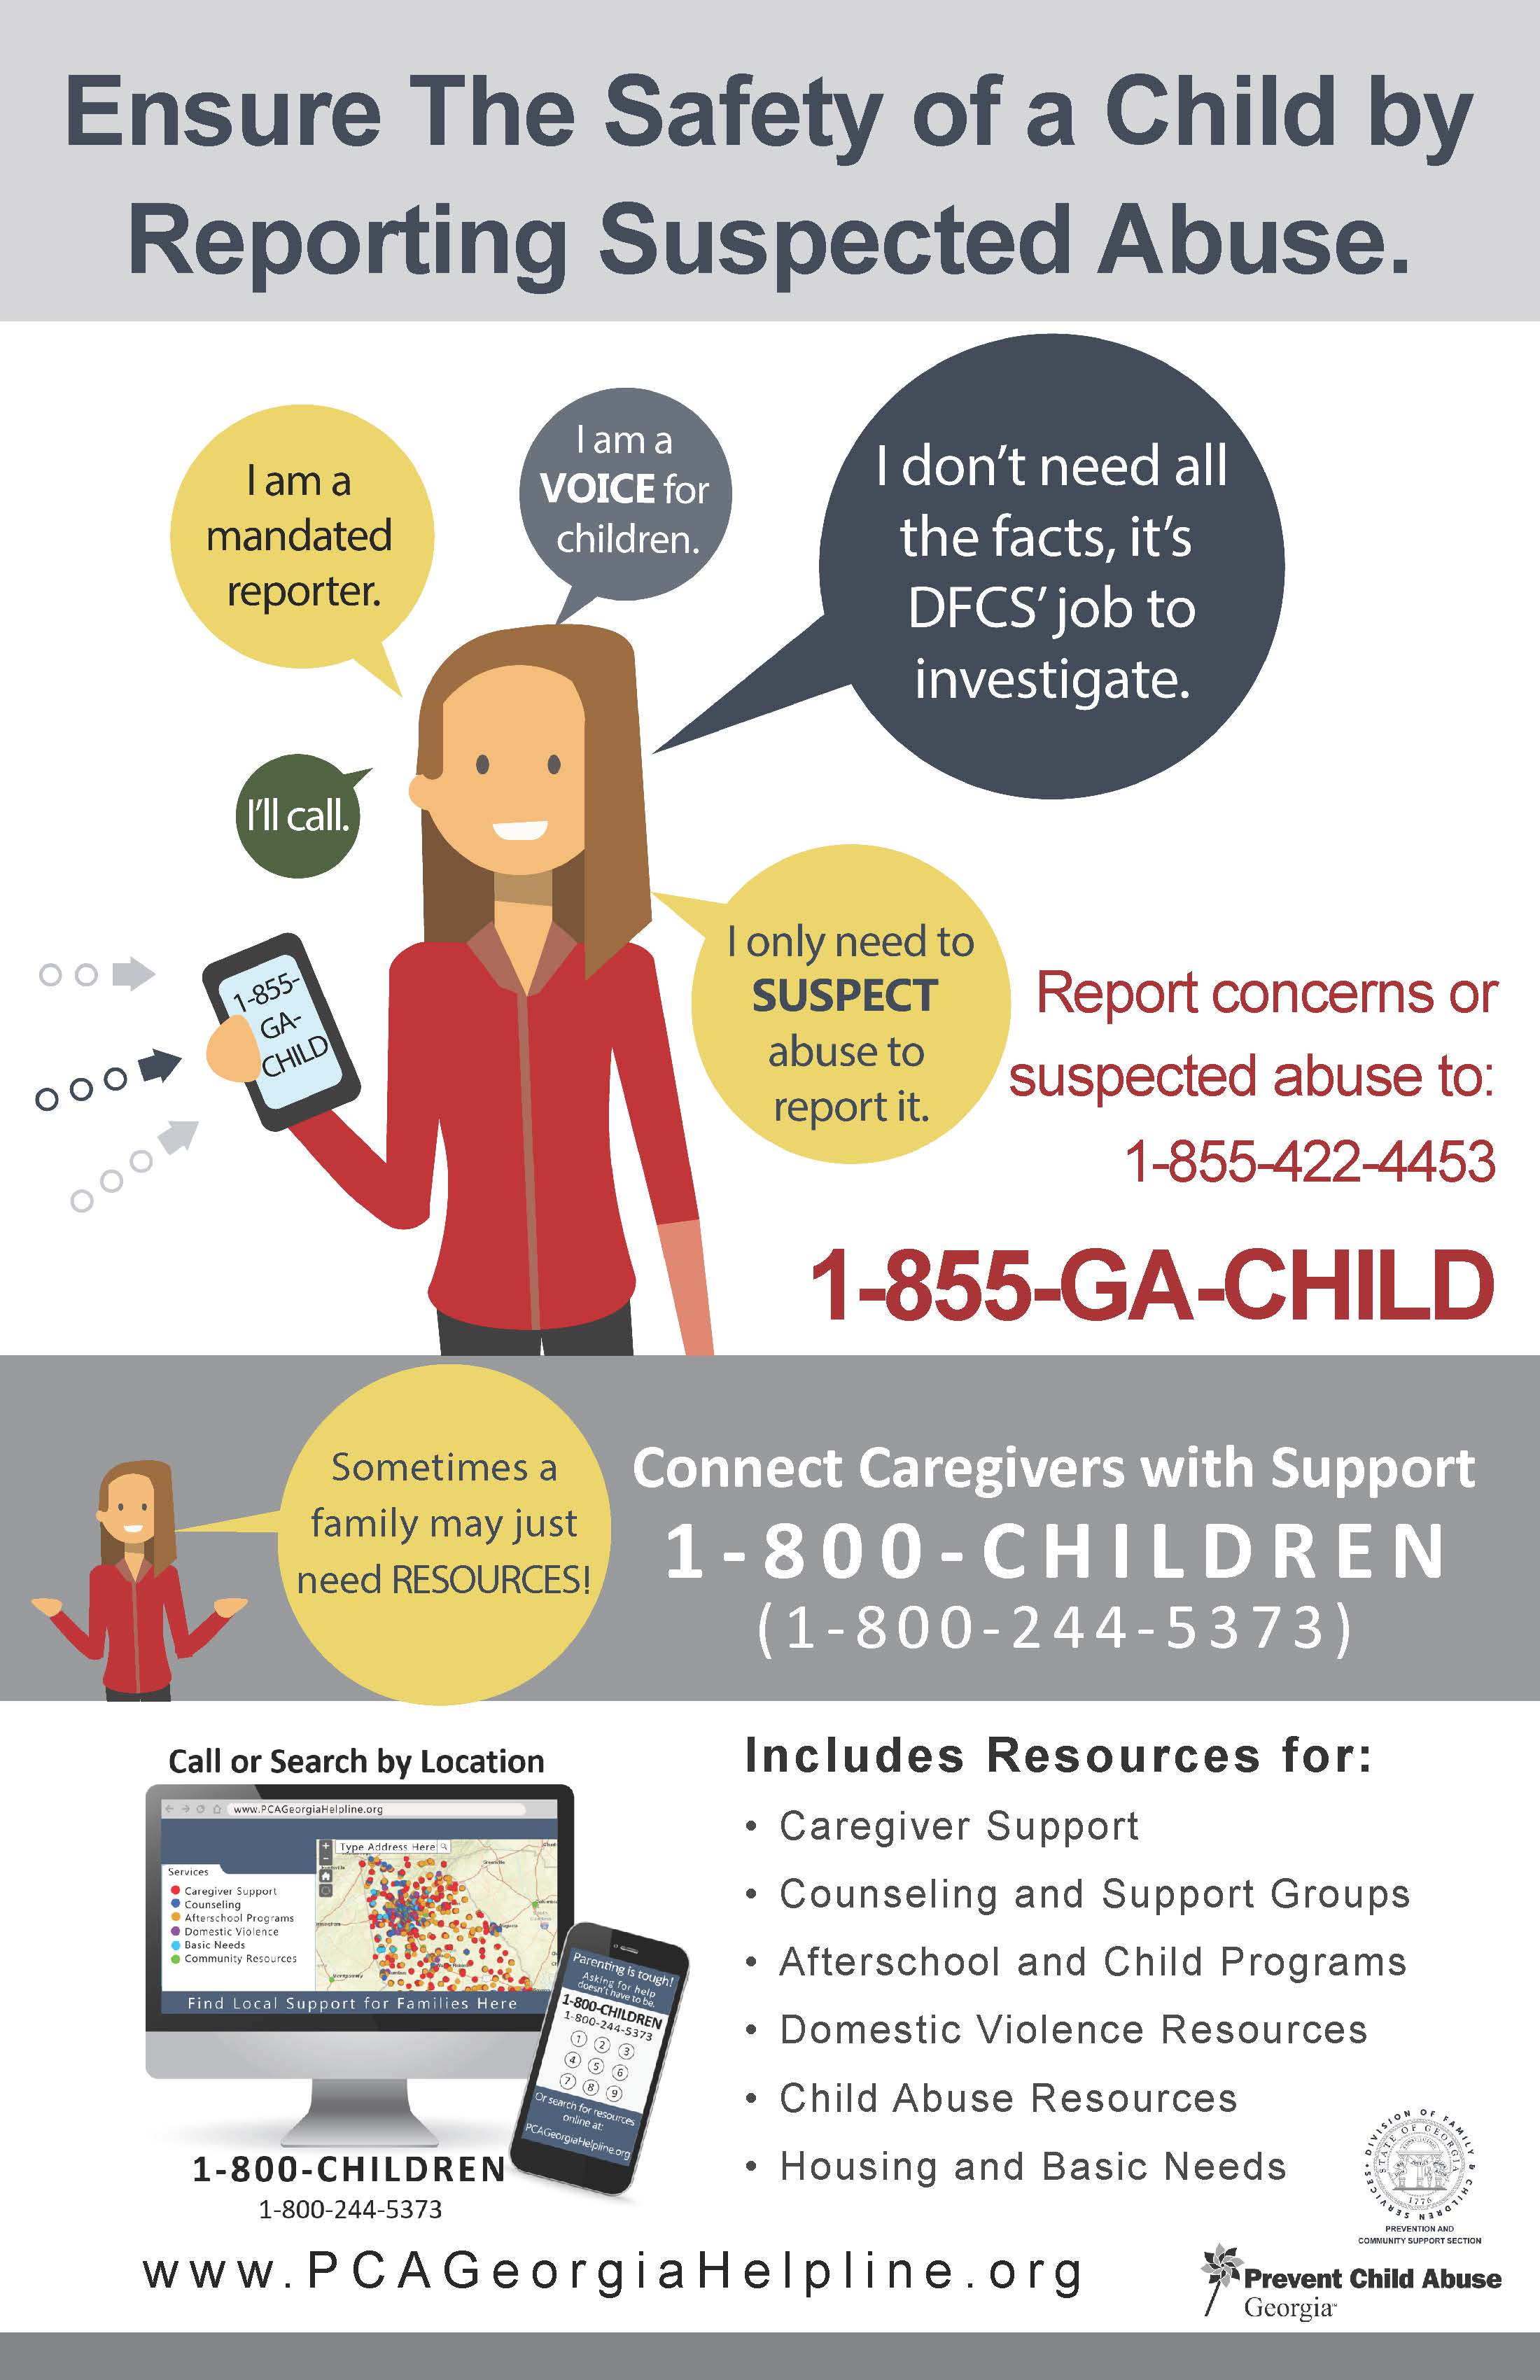 Ensure the safety of a child by reporting suspected abuse